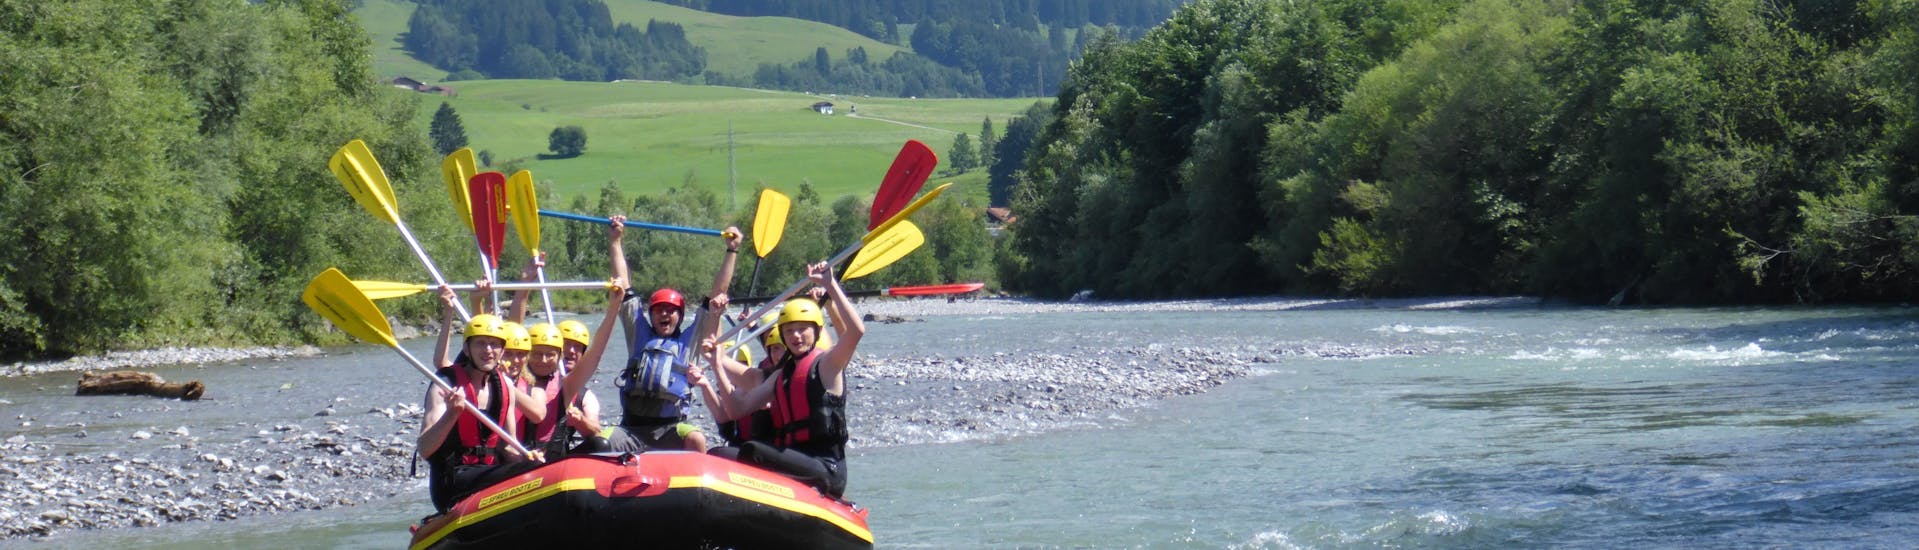 Soft rafting - safe Whitewater fun on the Iller Level 1.